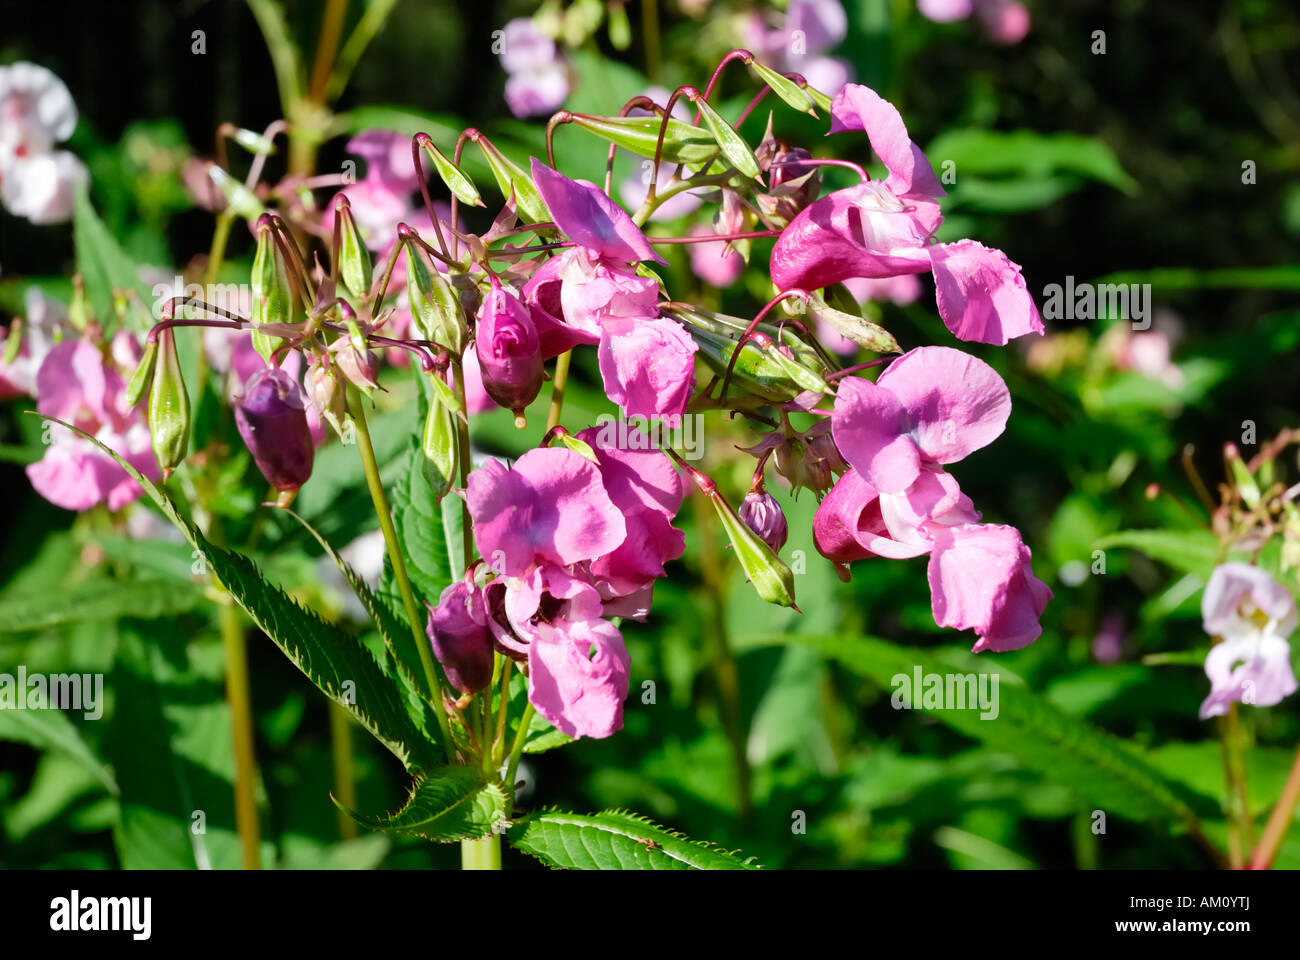 Impatiens glanulifera, Balsaminaceae imported pest displacing endemic species in many places Stock Photo